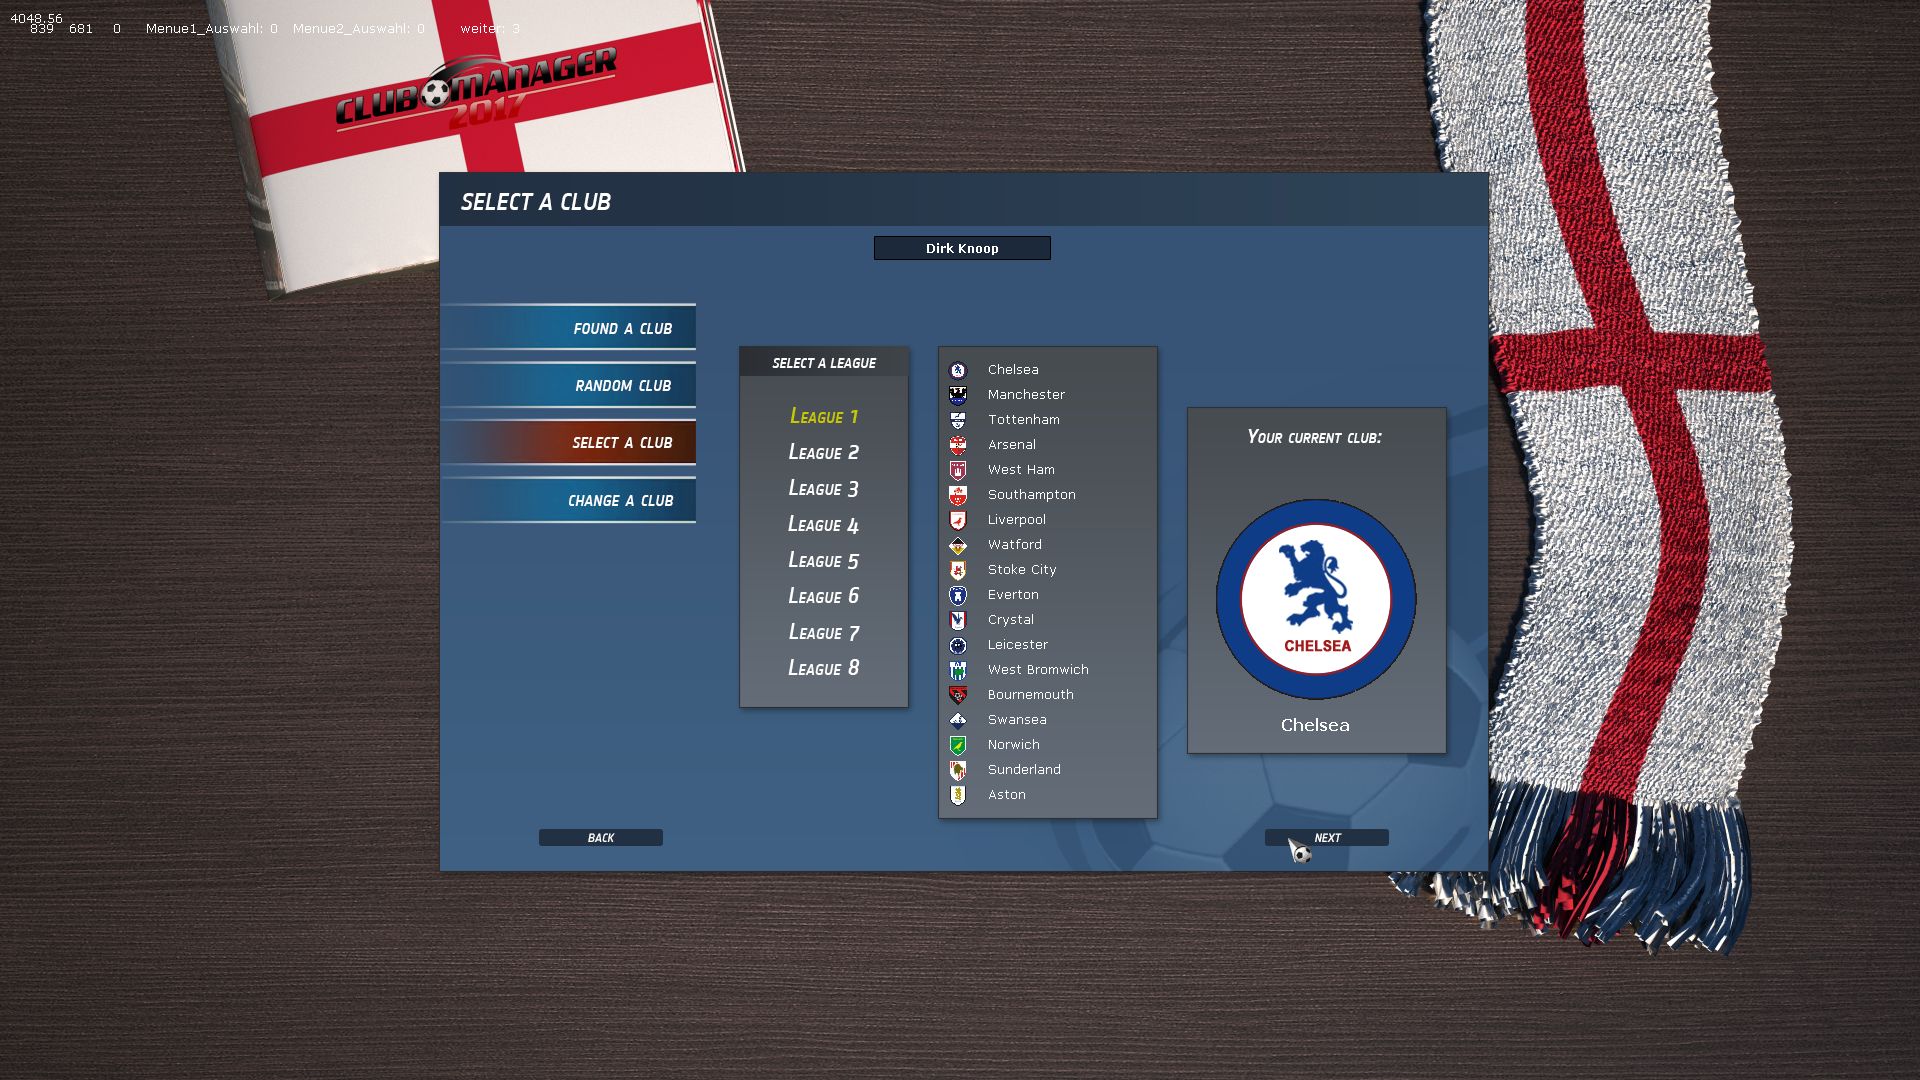 download free fm manager 2018